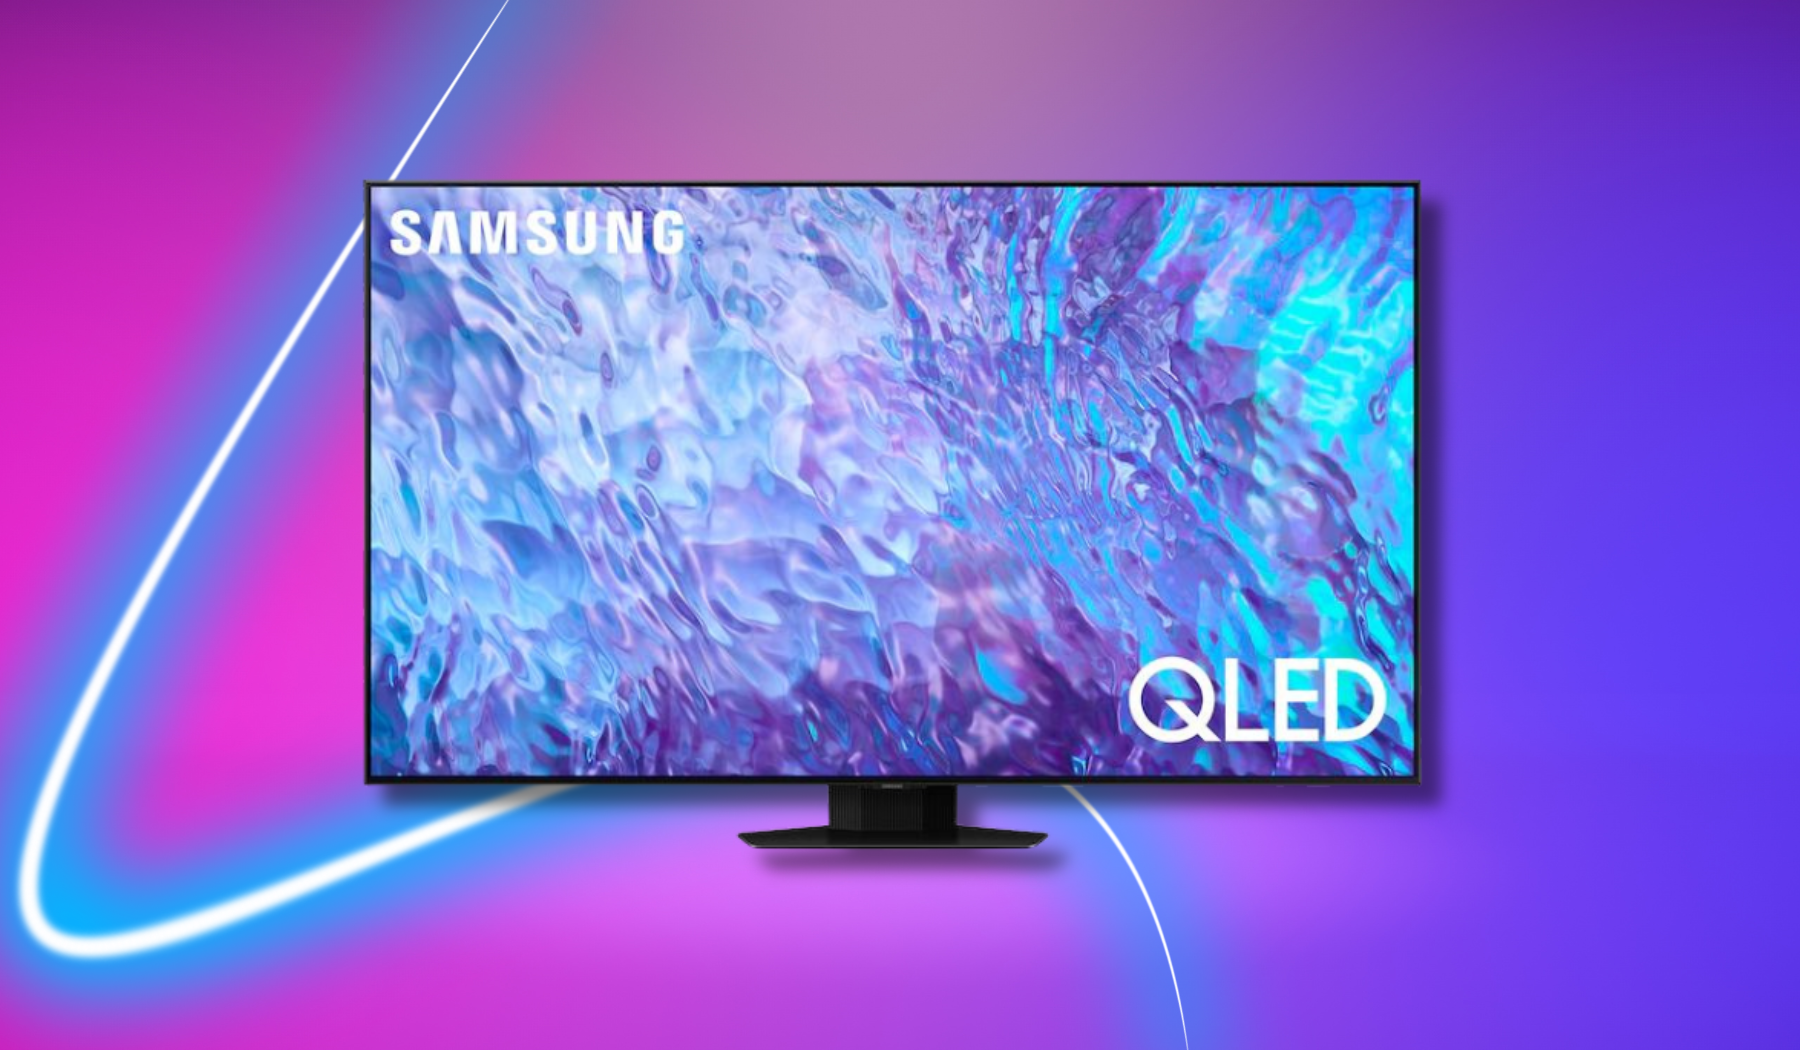 Samsung QLED TV with abstract water screensaver on pink and blue background